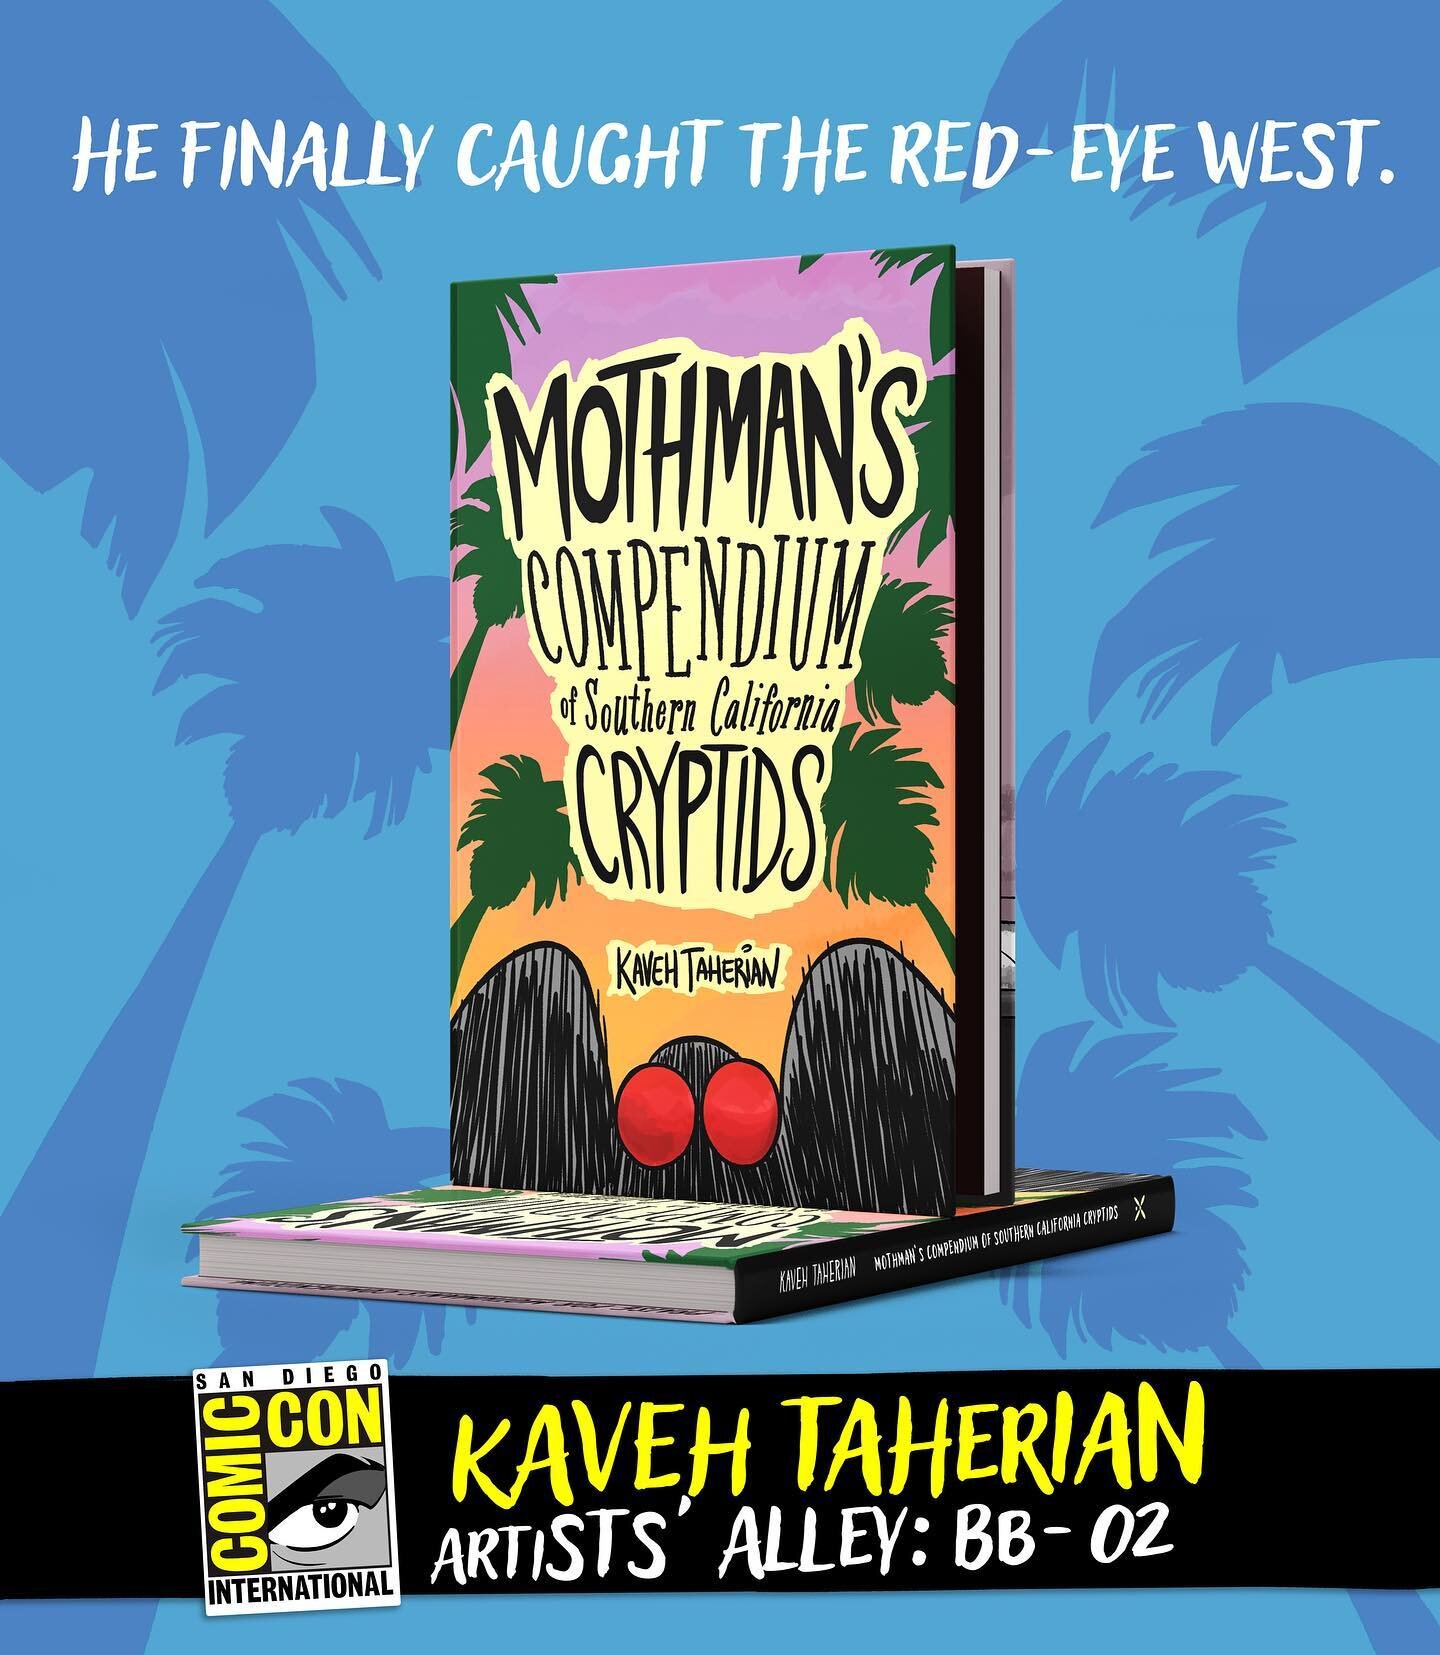 After months of hard work, I am thrilled to officially announce that my next book, Mothman's Compendium of Southern California Cryptids, will be ready just in time for @comic_con 2023! I&rsquo;ll be sharing more info about it in the coming weeks, but